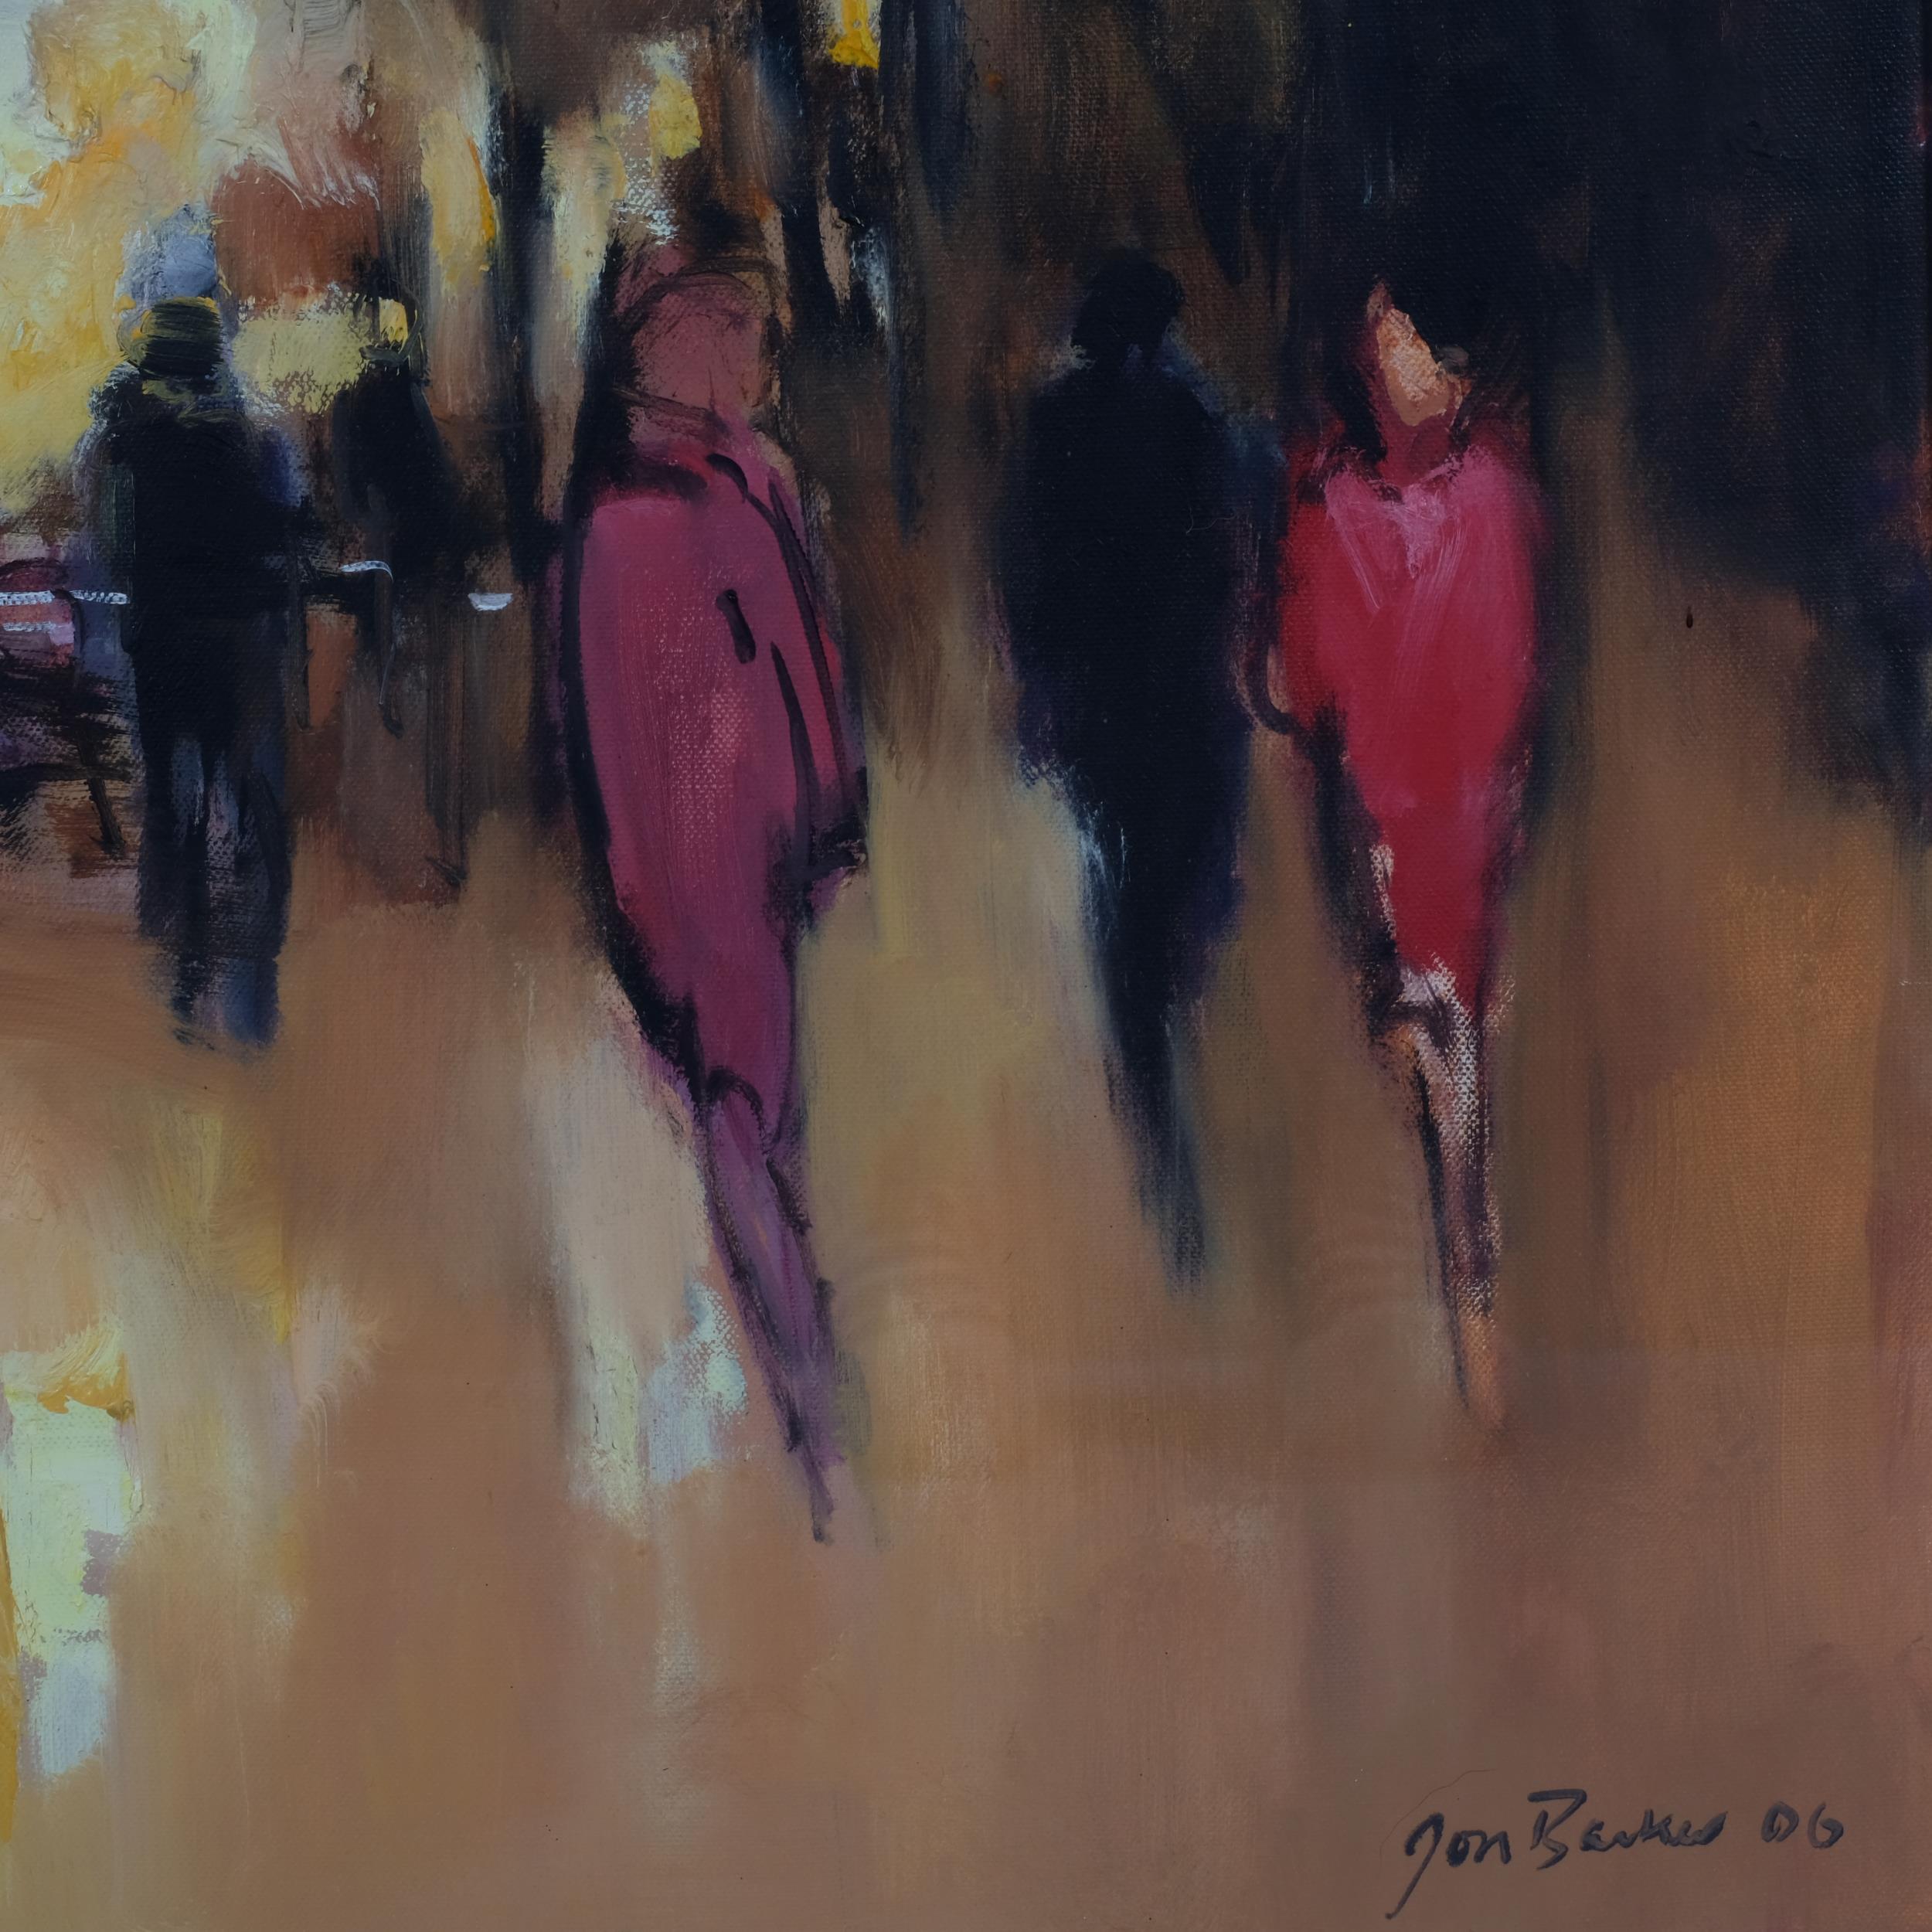 Jon Barker (born 1950), Continental street scene, oil on board, signed and dated 2006, framed and - Image 3 of 4